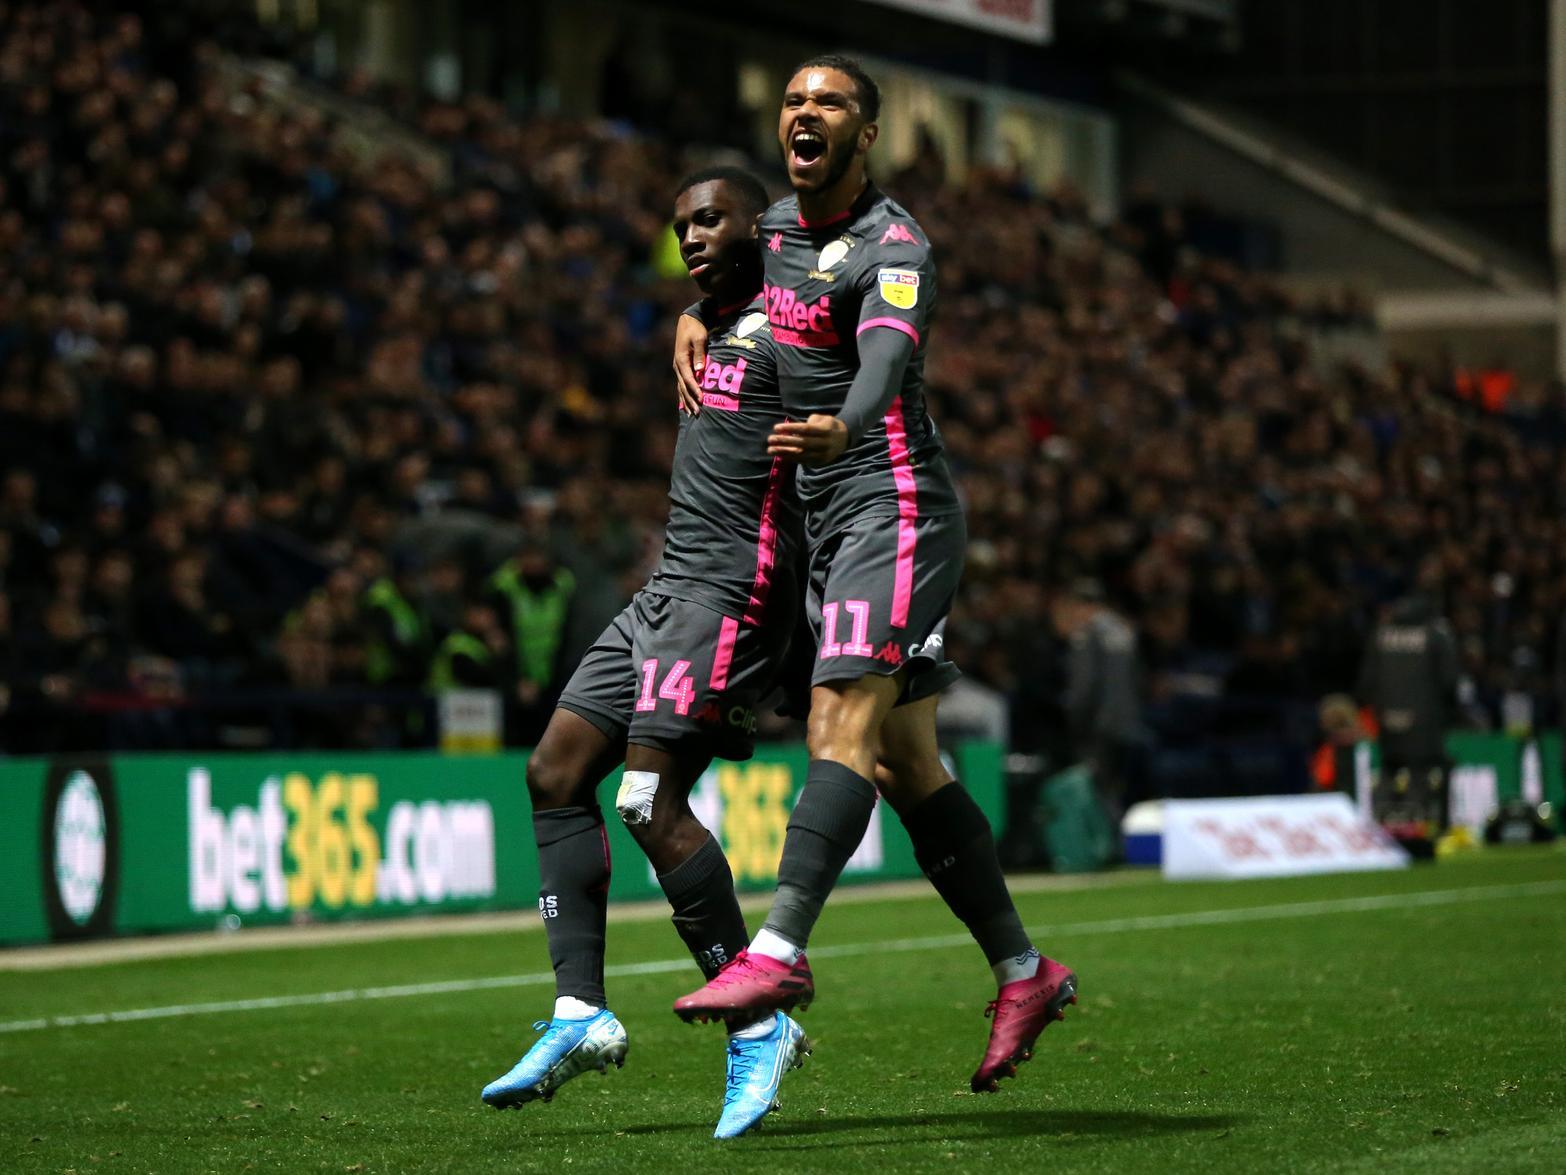 Leeds perhaps missed their creative spark at Deepdale, as without Pablo Hernandez they failed to make their superiority count. A late Eddie Nketiah goal rescued a point from what was admittedly a tough fixture on paper.